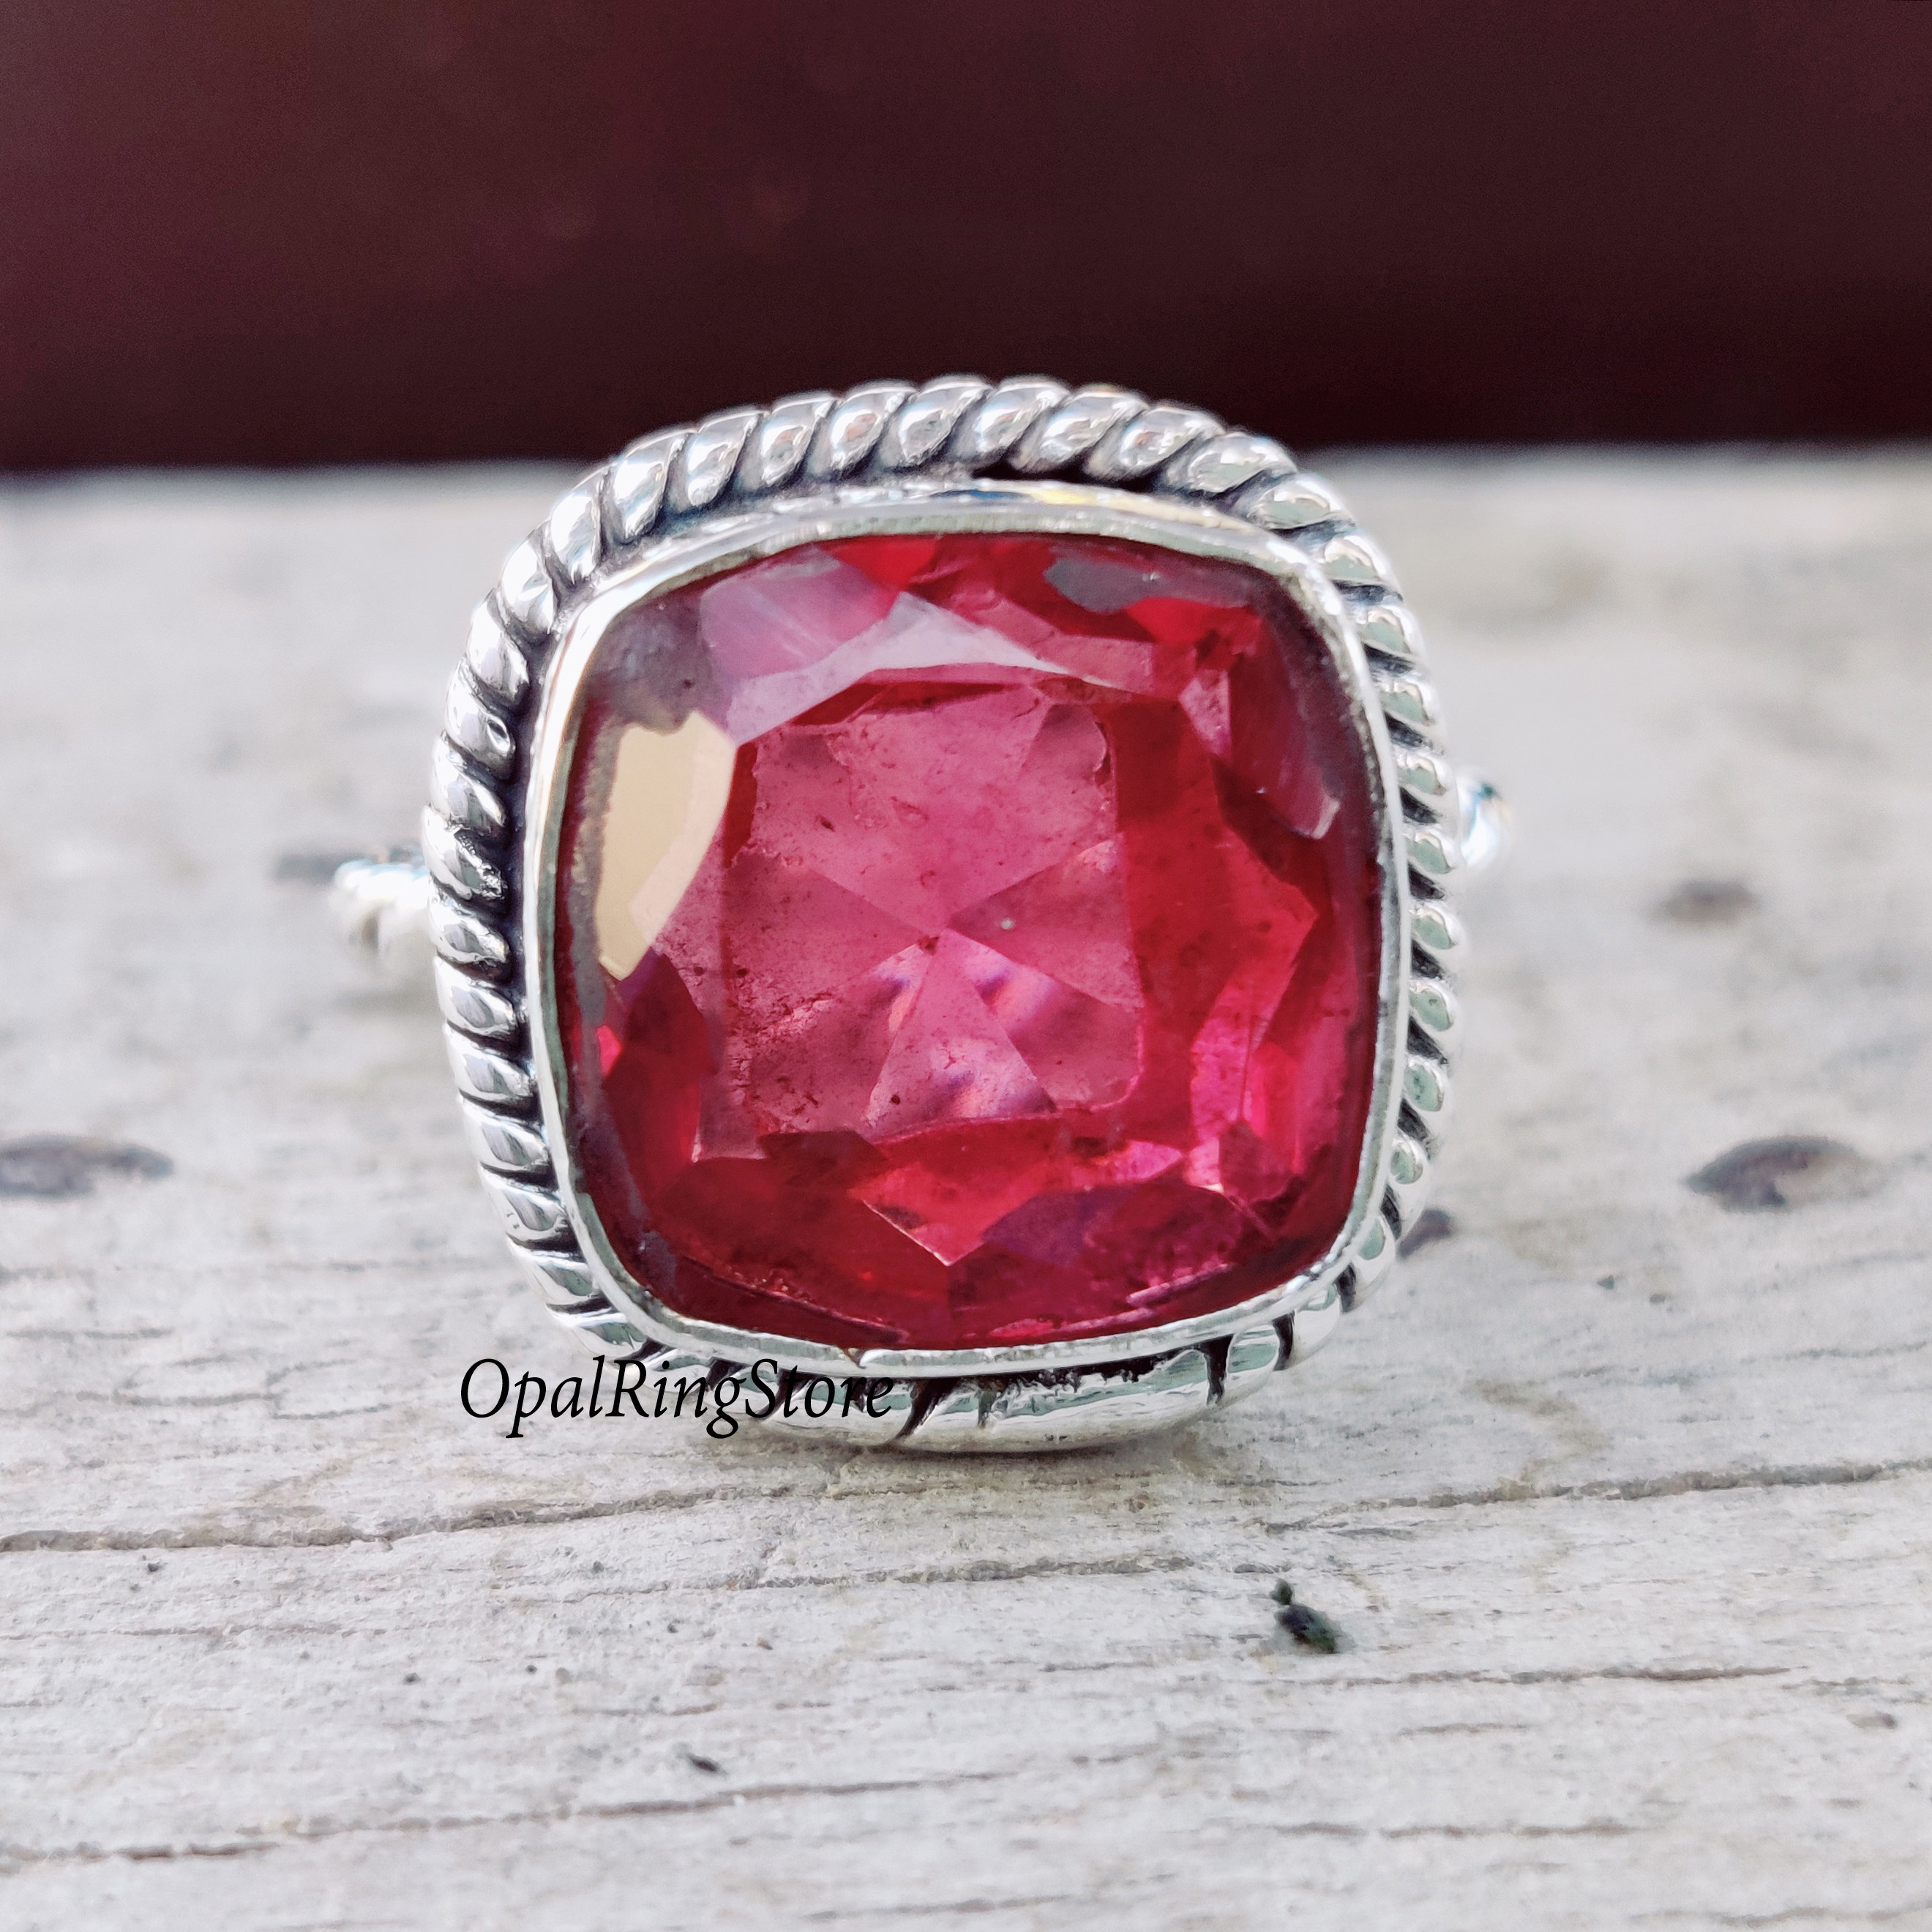 Natural Birthday Gift Solid 925K Sterling Silver Celtic Men's Tourmaline Ring Size 4-13 Gift For Him Artisan Handcrafted Jewelry Good Friday Gift Pink Tourmaline Silver Ring Faceted Square 